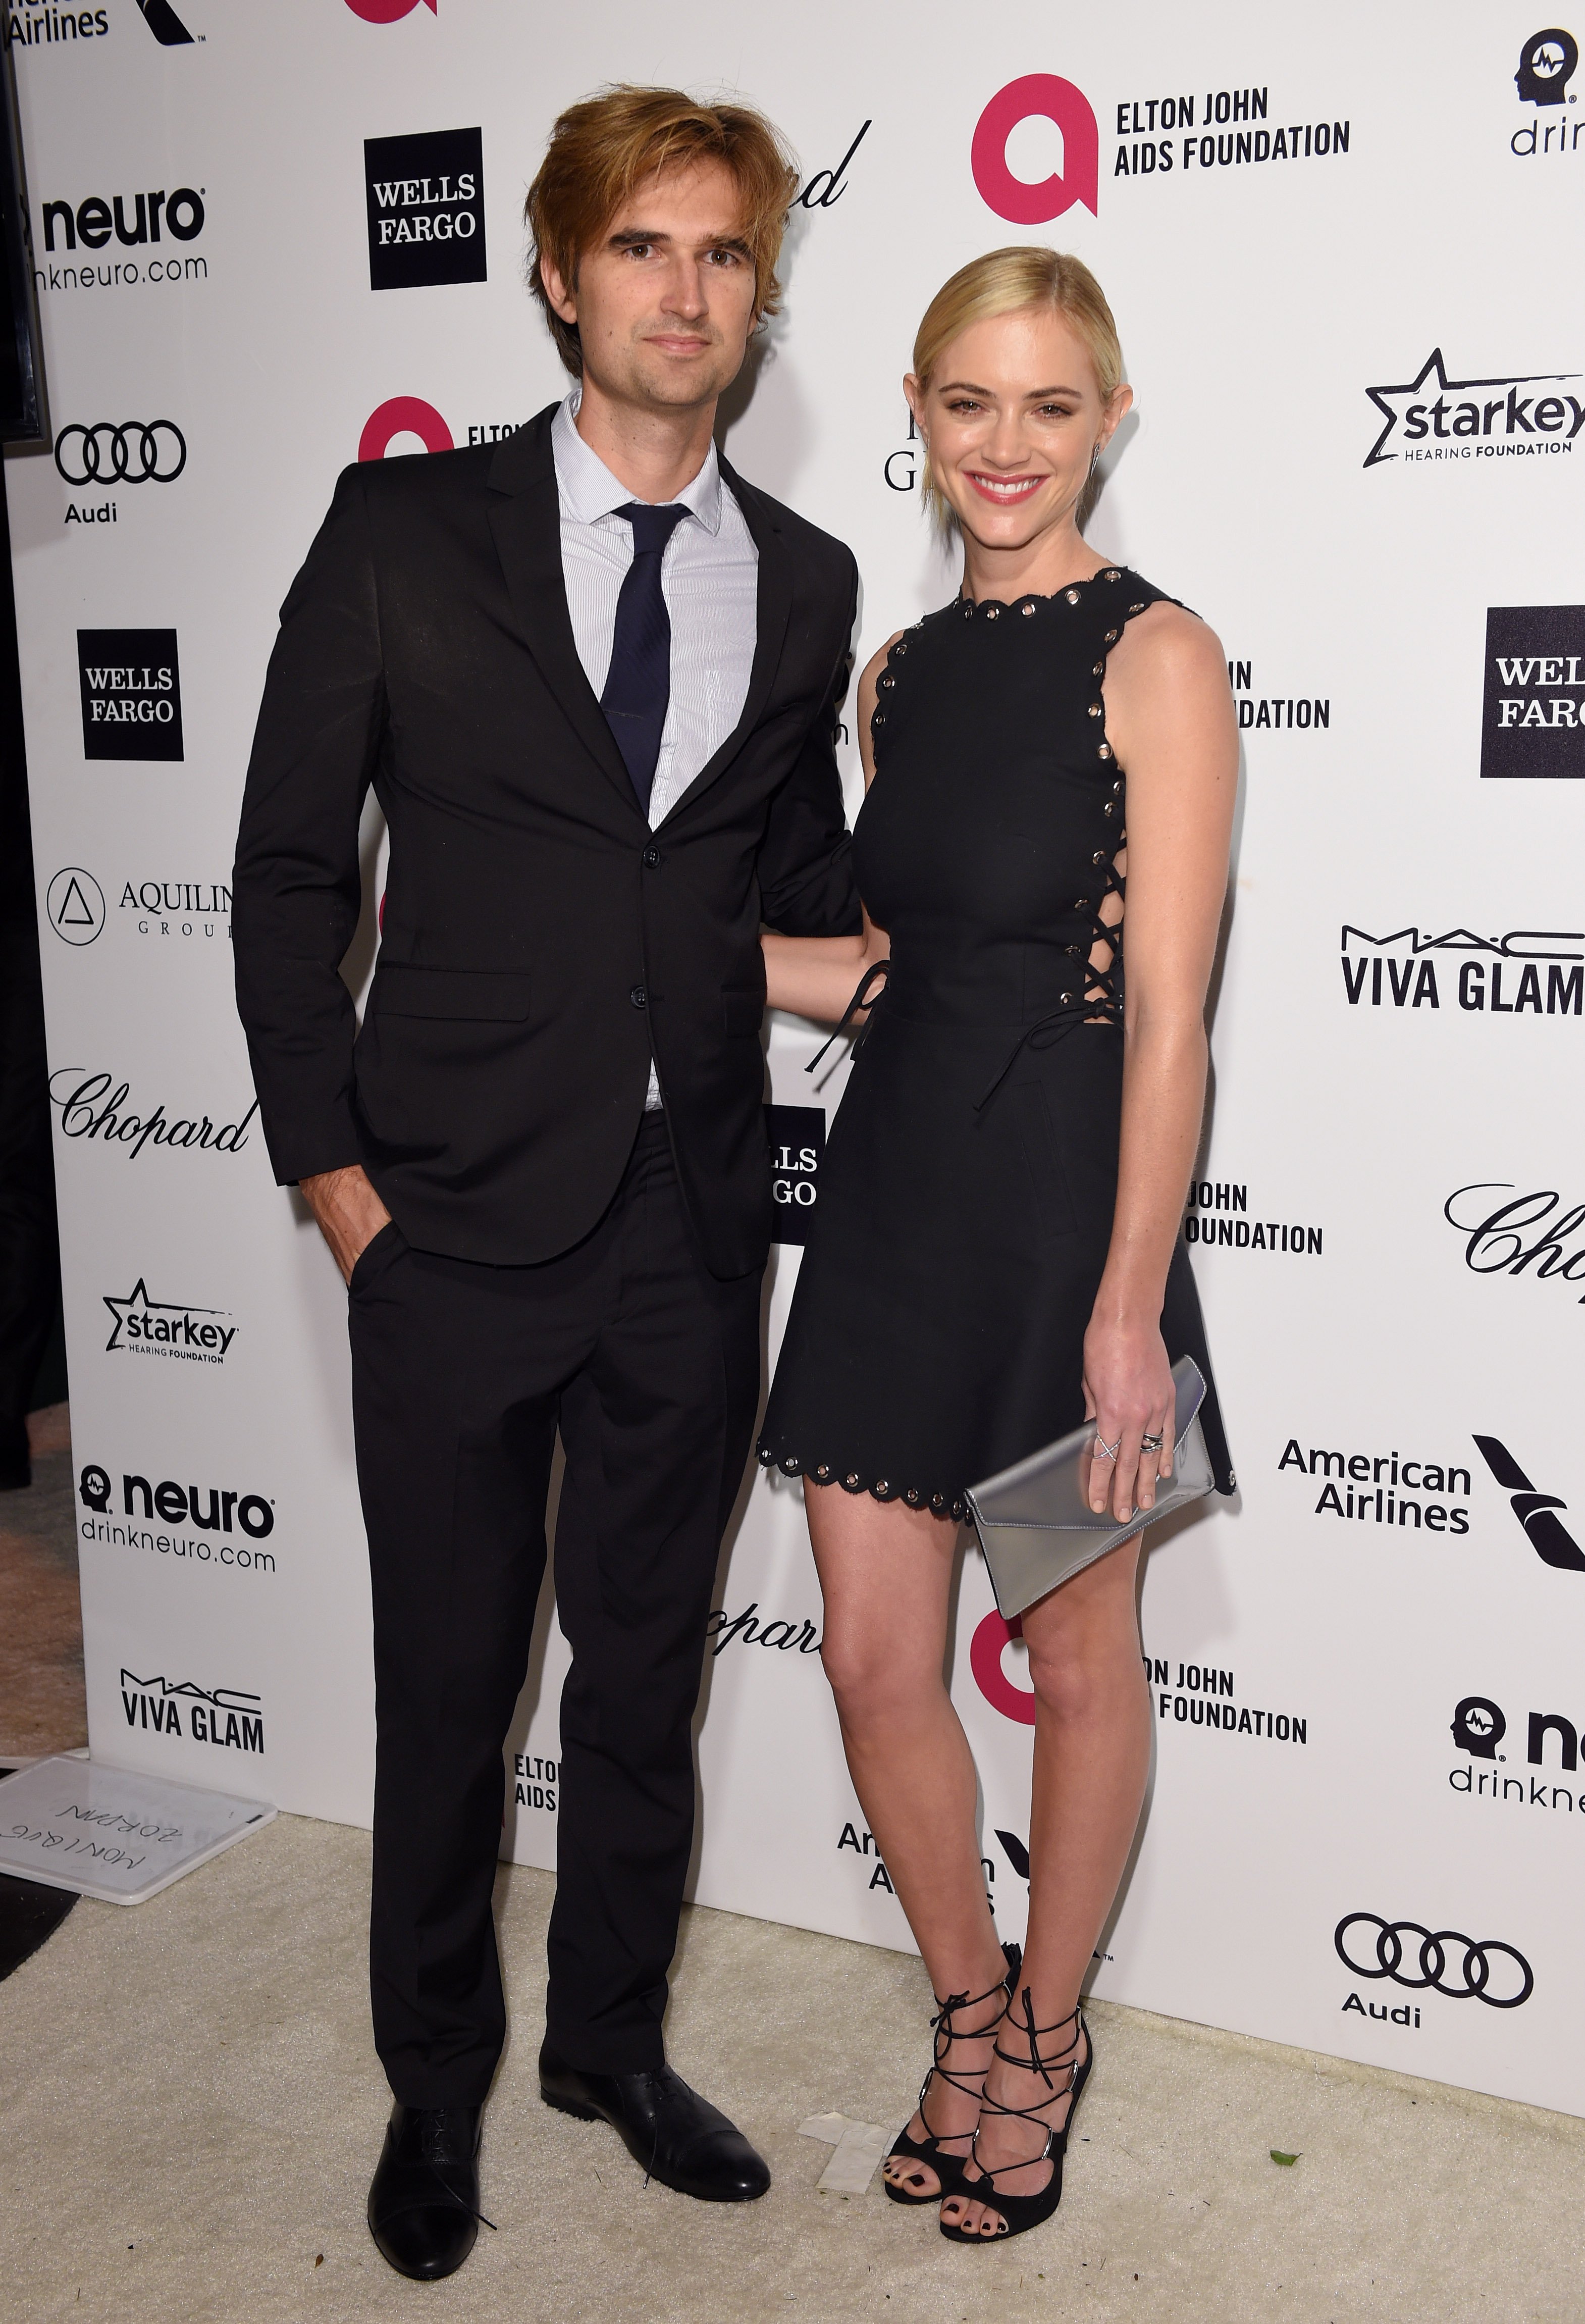 Emily Wickersham and Blake Hanley attend the Elton John AIDS Foundation's 23rd annual Academy Awards Viewing Party at The City of West Hollywood Park on February 22, 2015, in West Hollywood, California. | Source: Getty Images